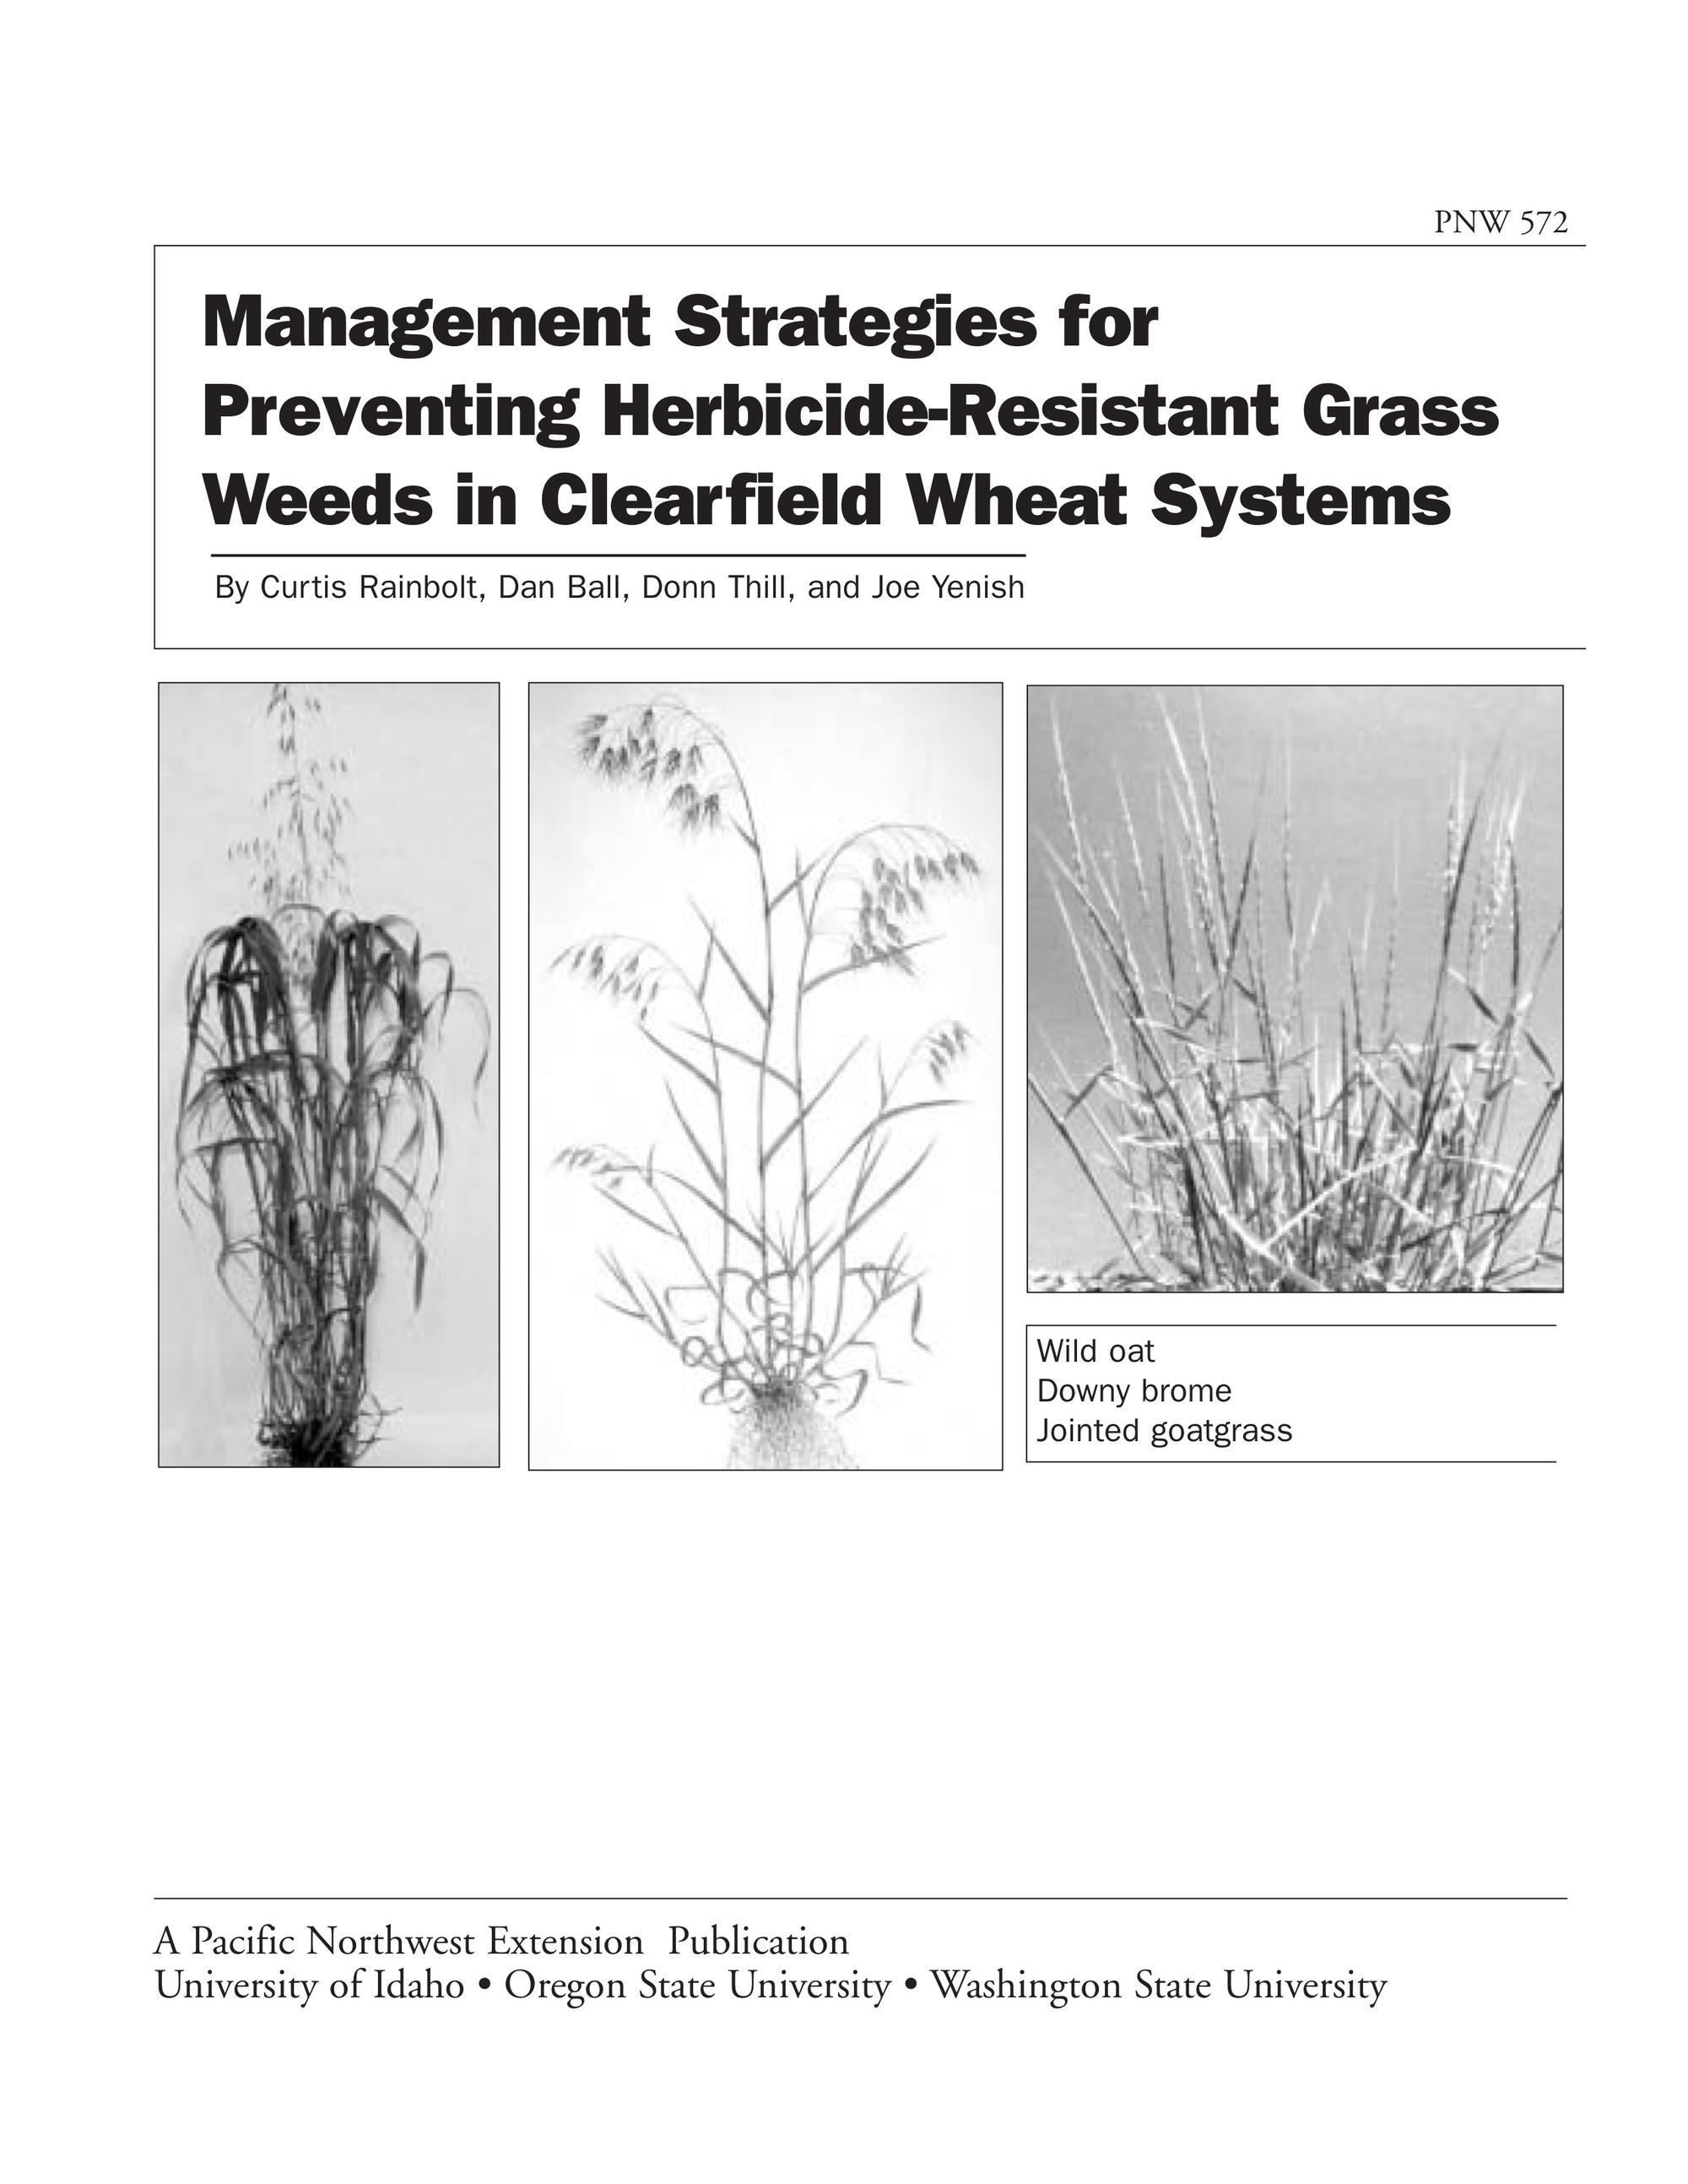 Image of Management Strategies for Preventing Herbicide-Resistant Grass Weeds in Clearfield Wheat Systems publication